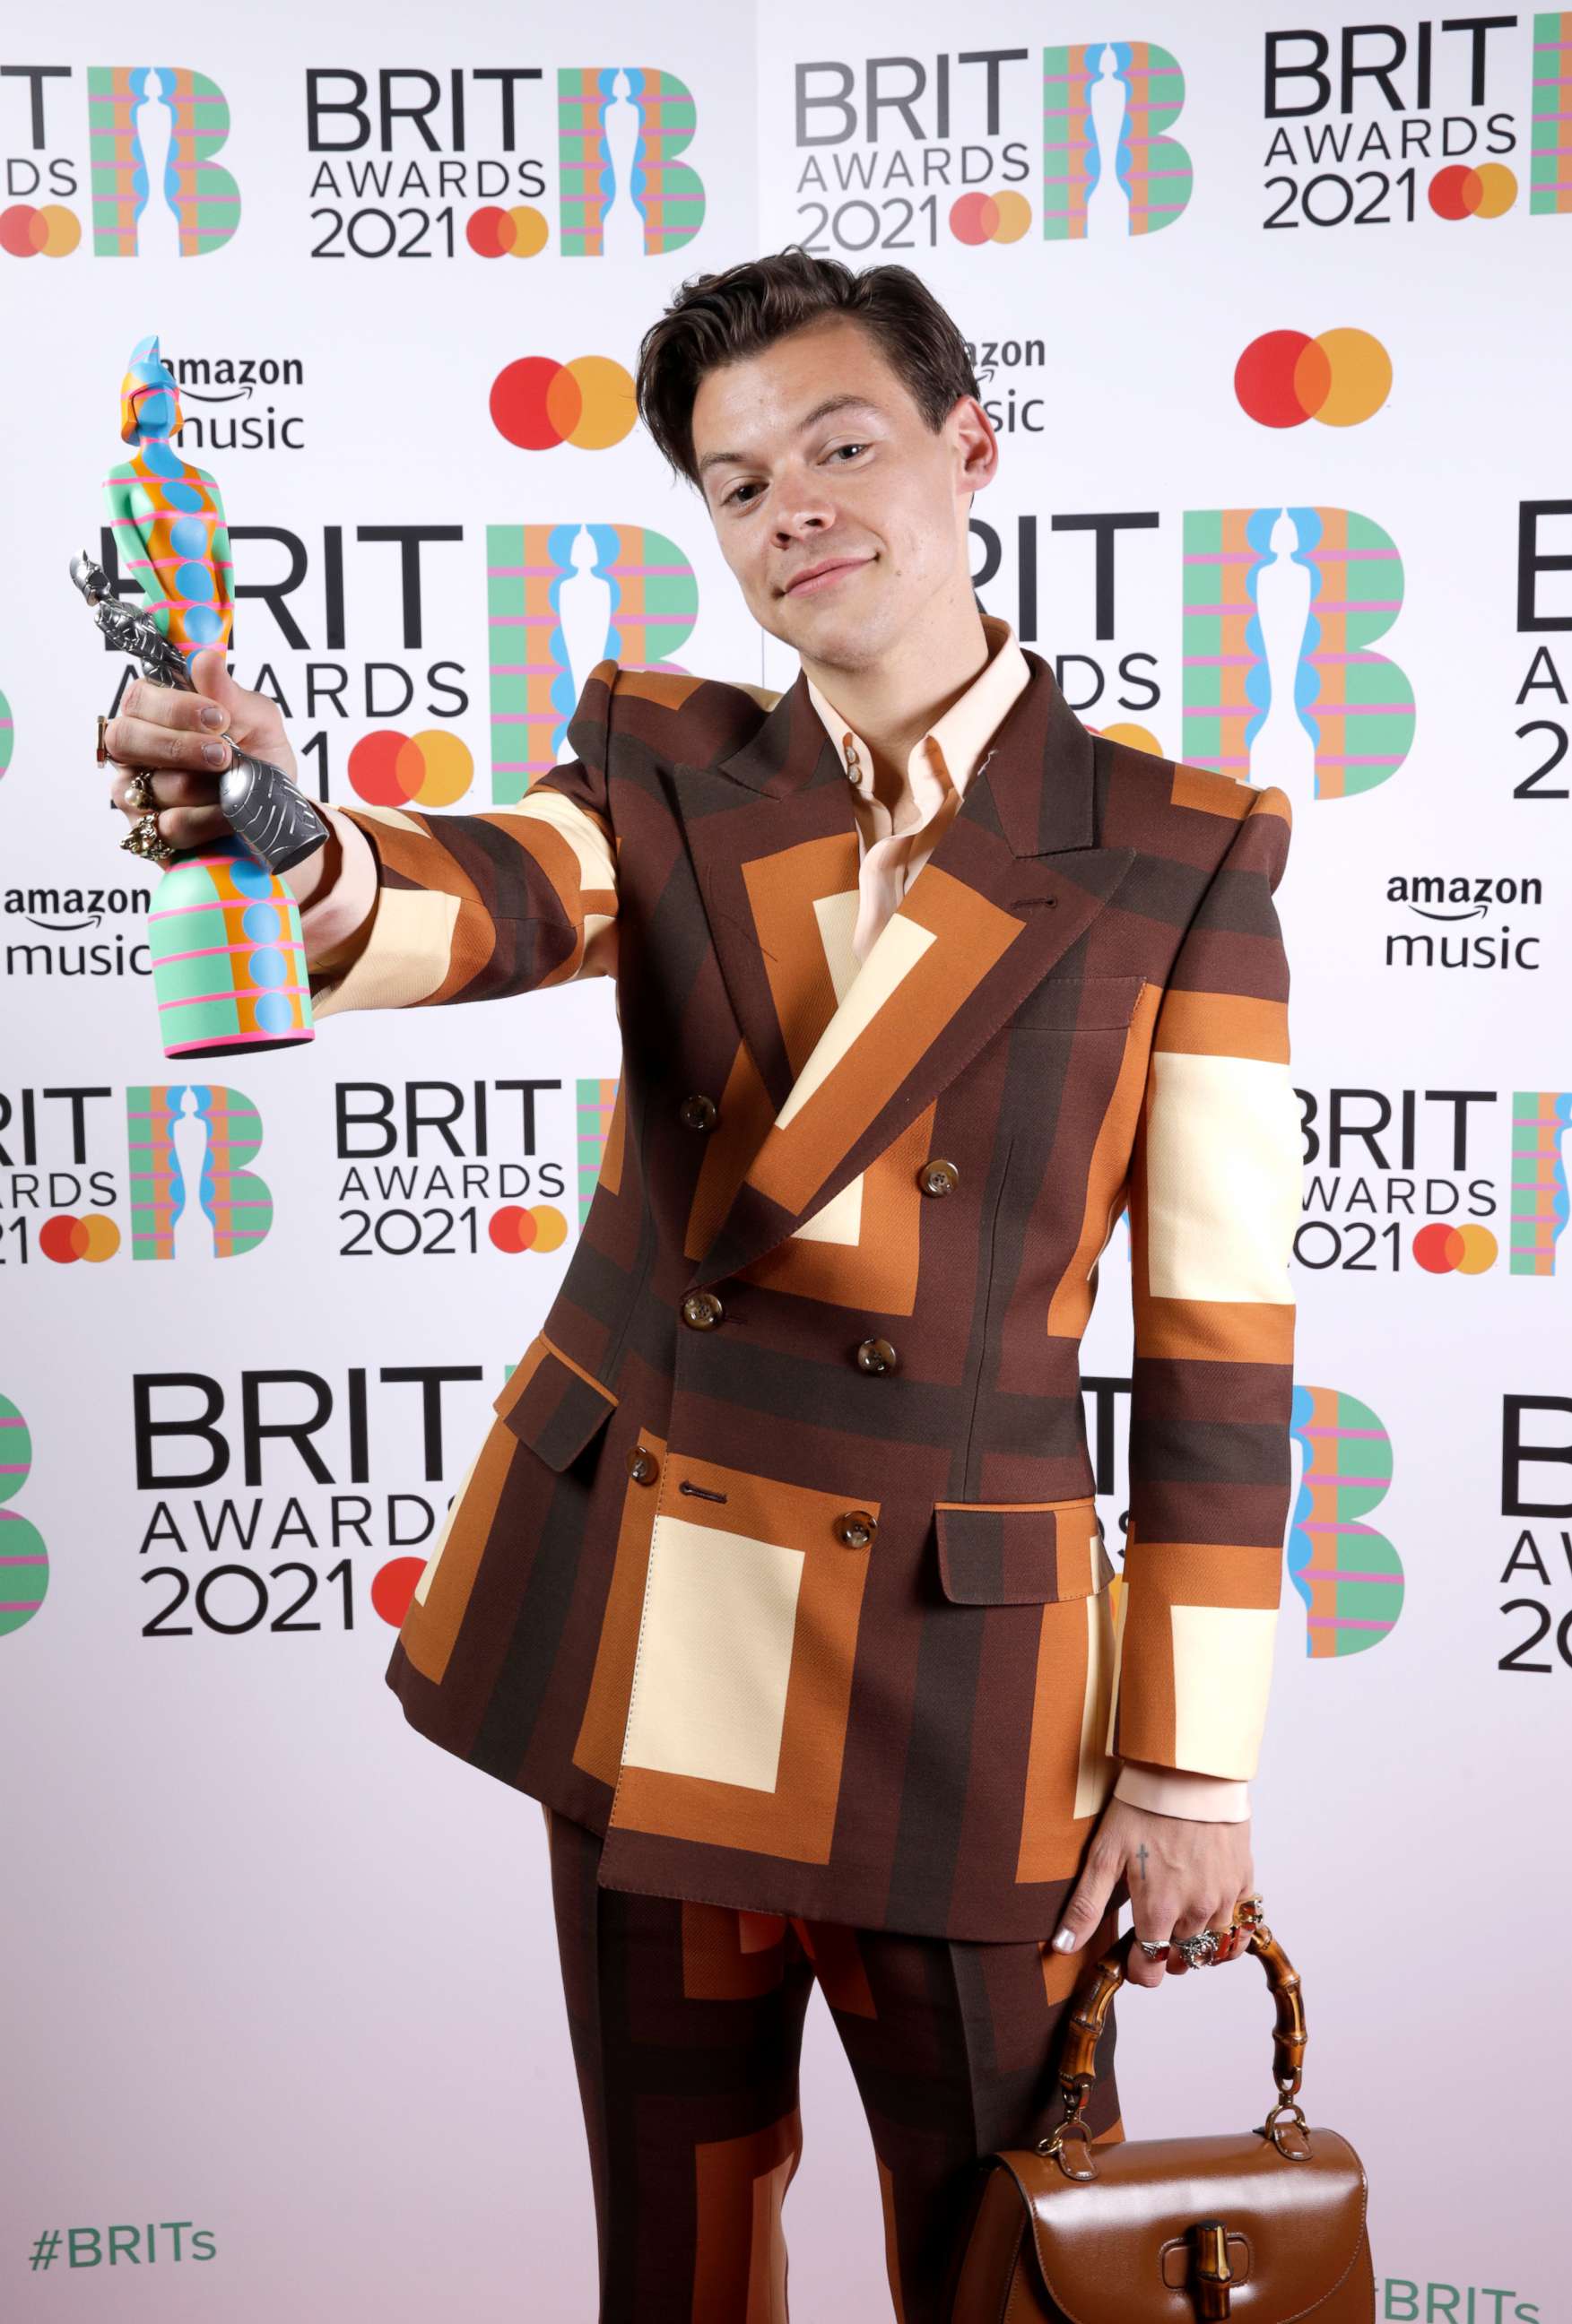 PHOTO: Harry Styles wins the Mastercard British Single award for Watermelon Sugar during The BRIT Awards 2021 at The O2 Arena, May 11, 2021, in London.